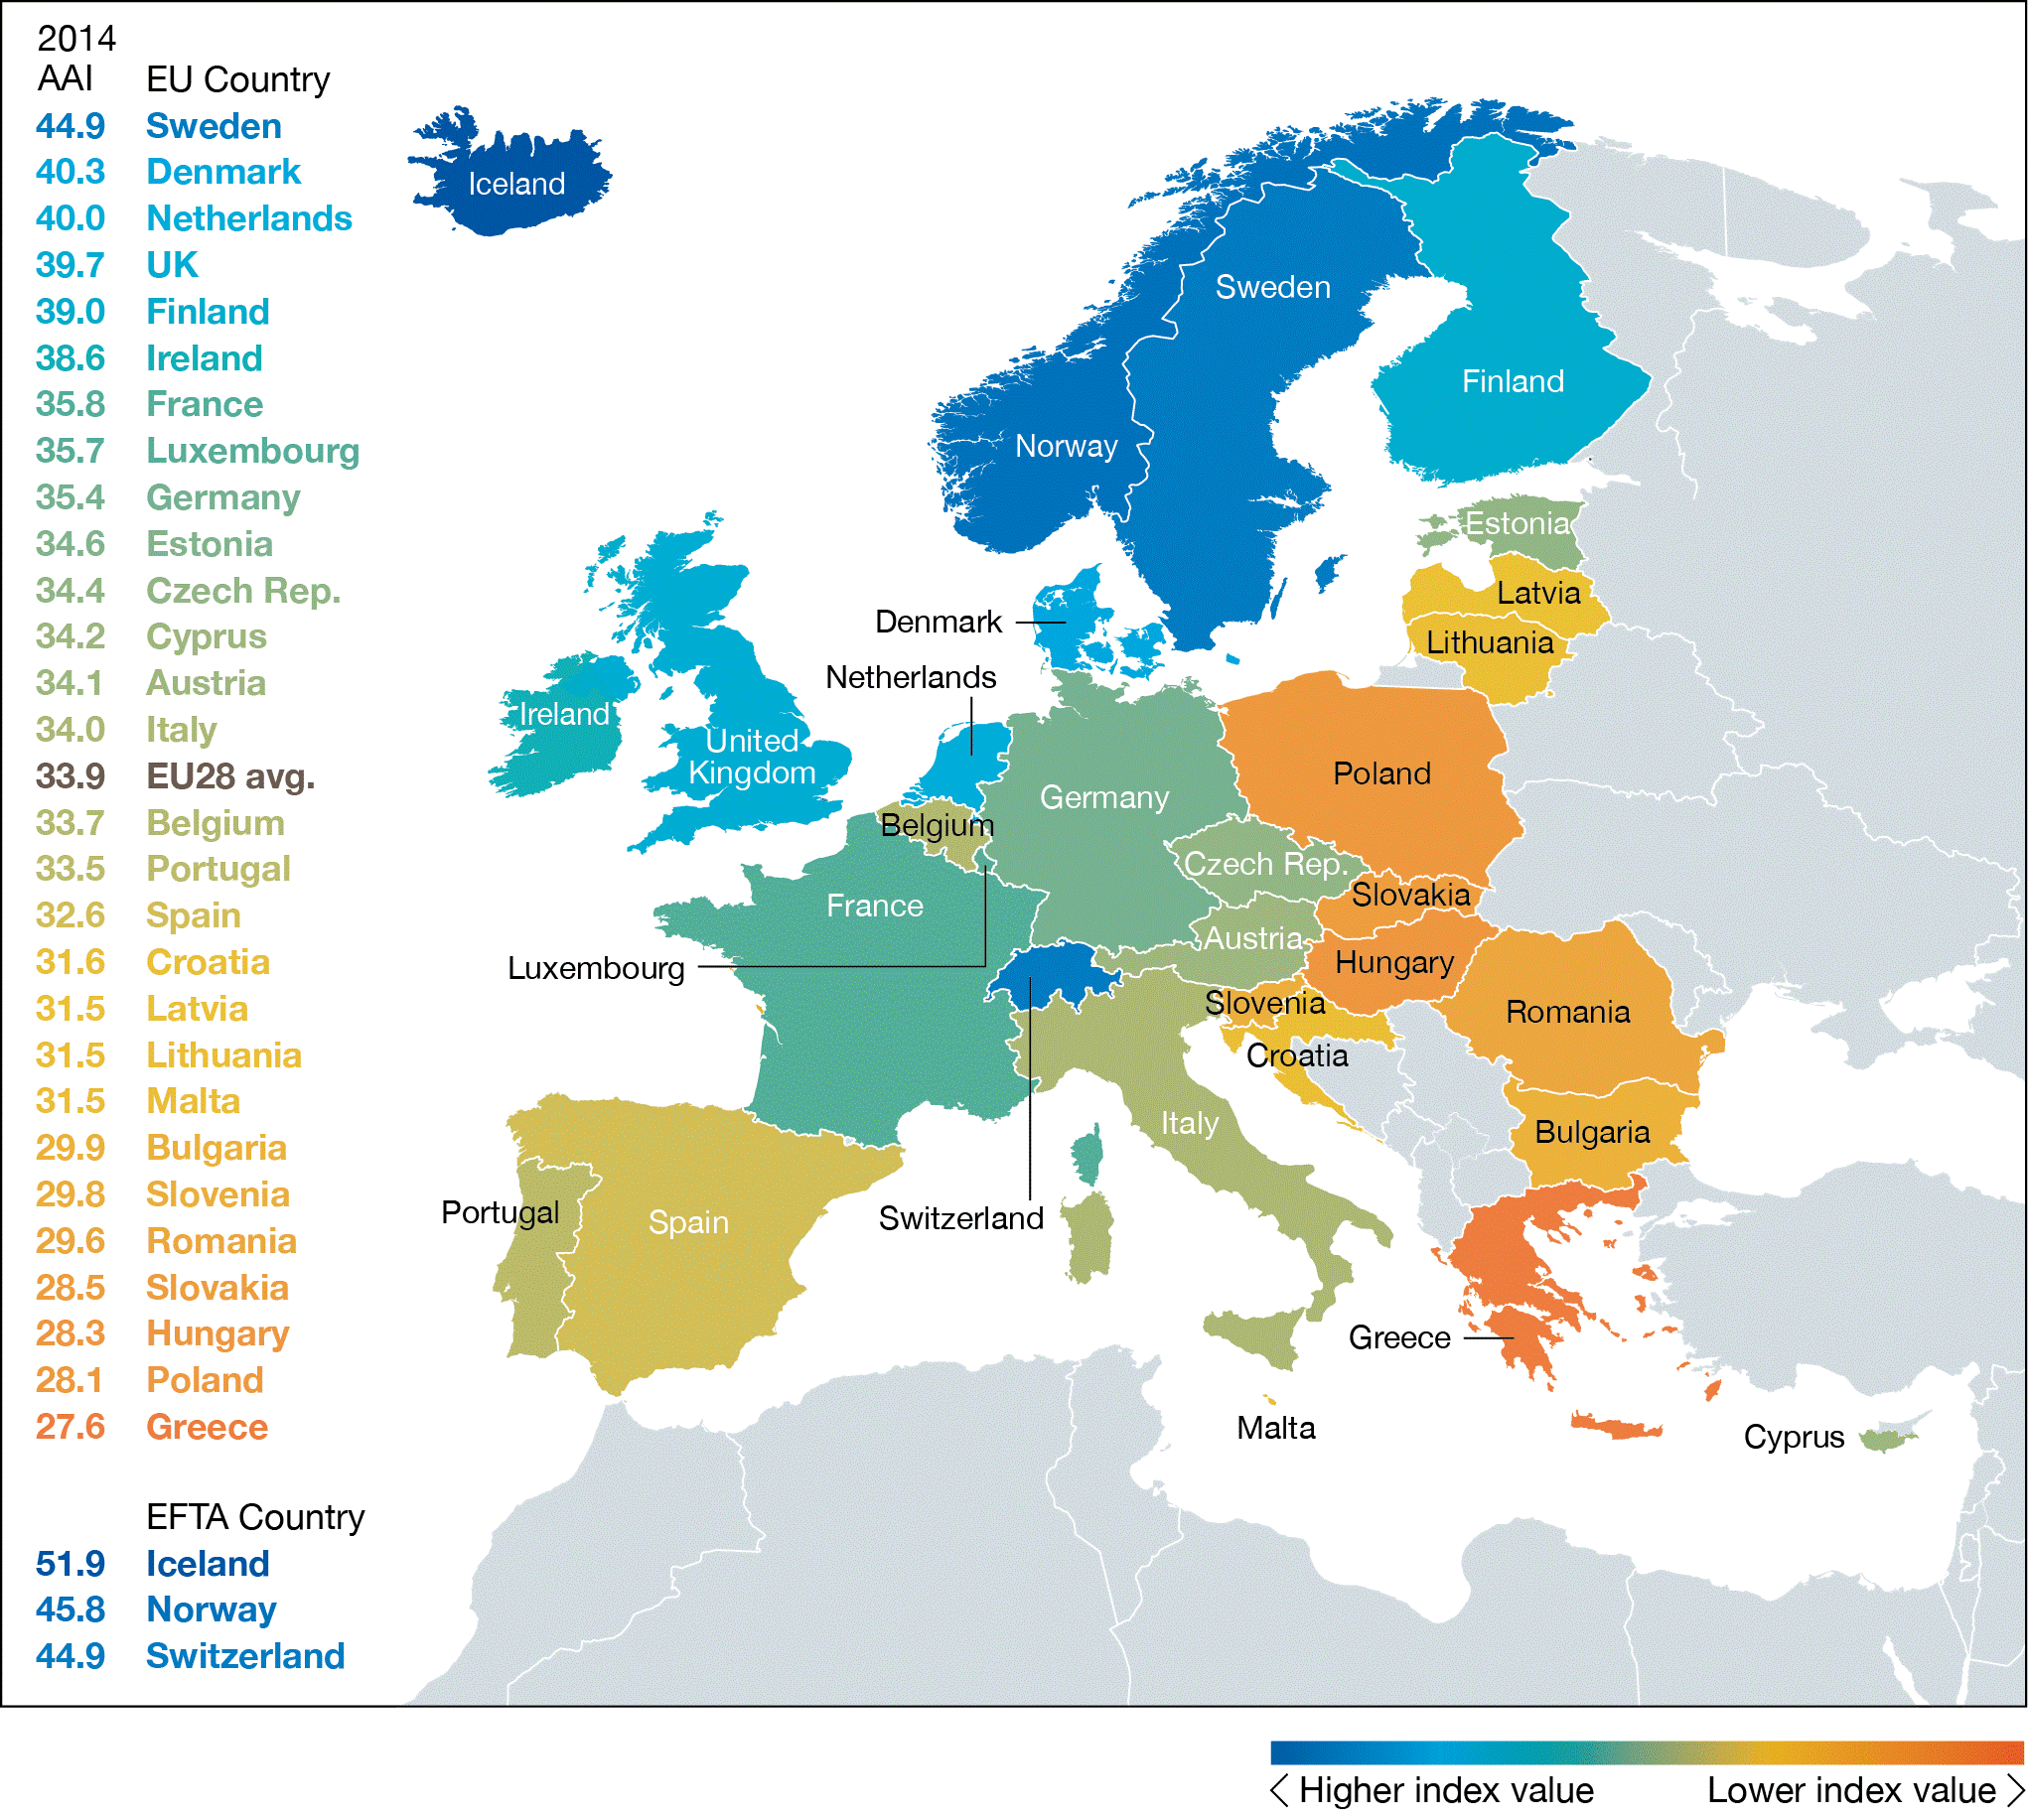 Ranking of European countries on the basis of the 2014 Active Ageing Index.